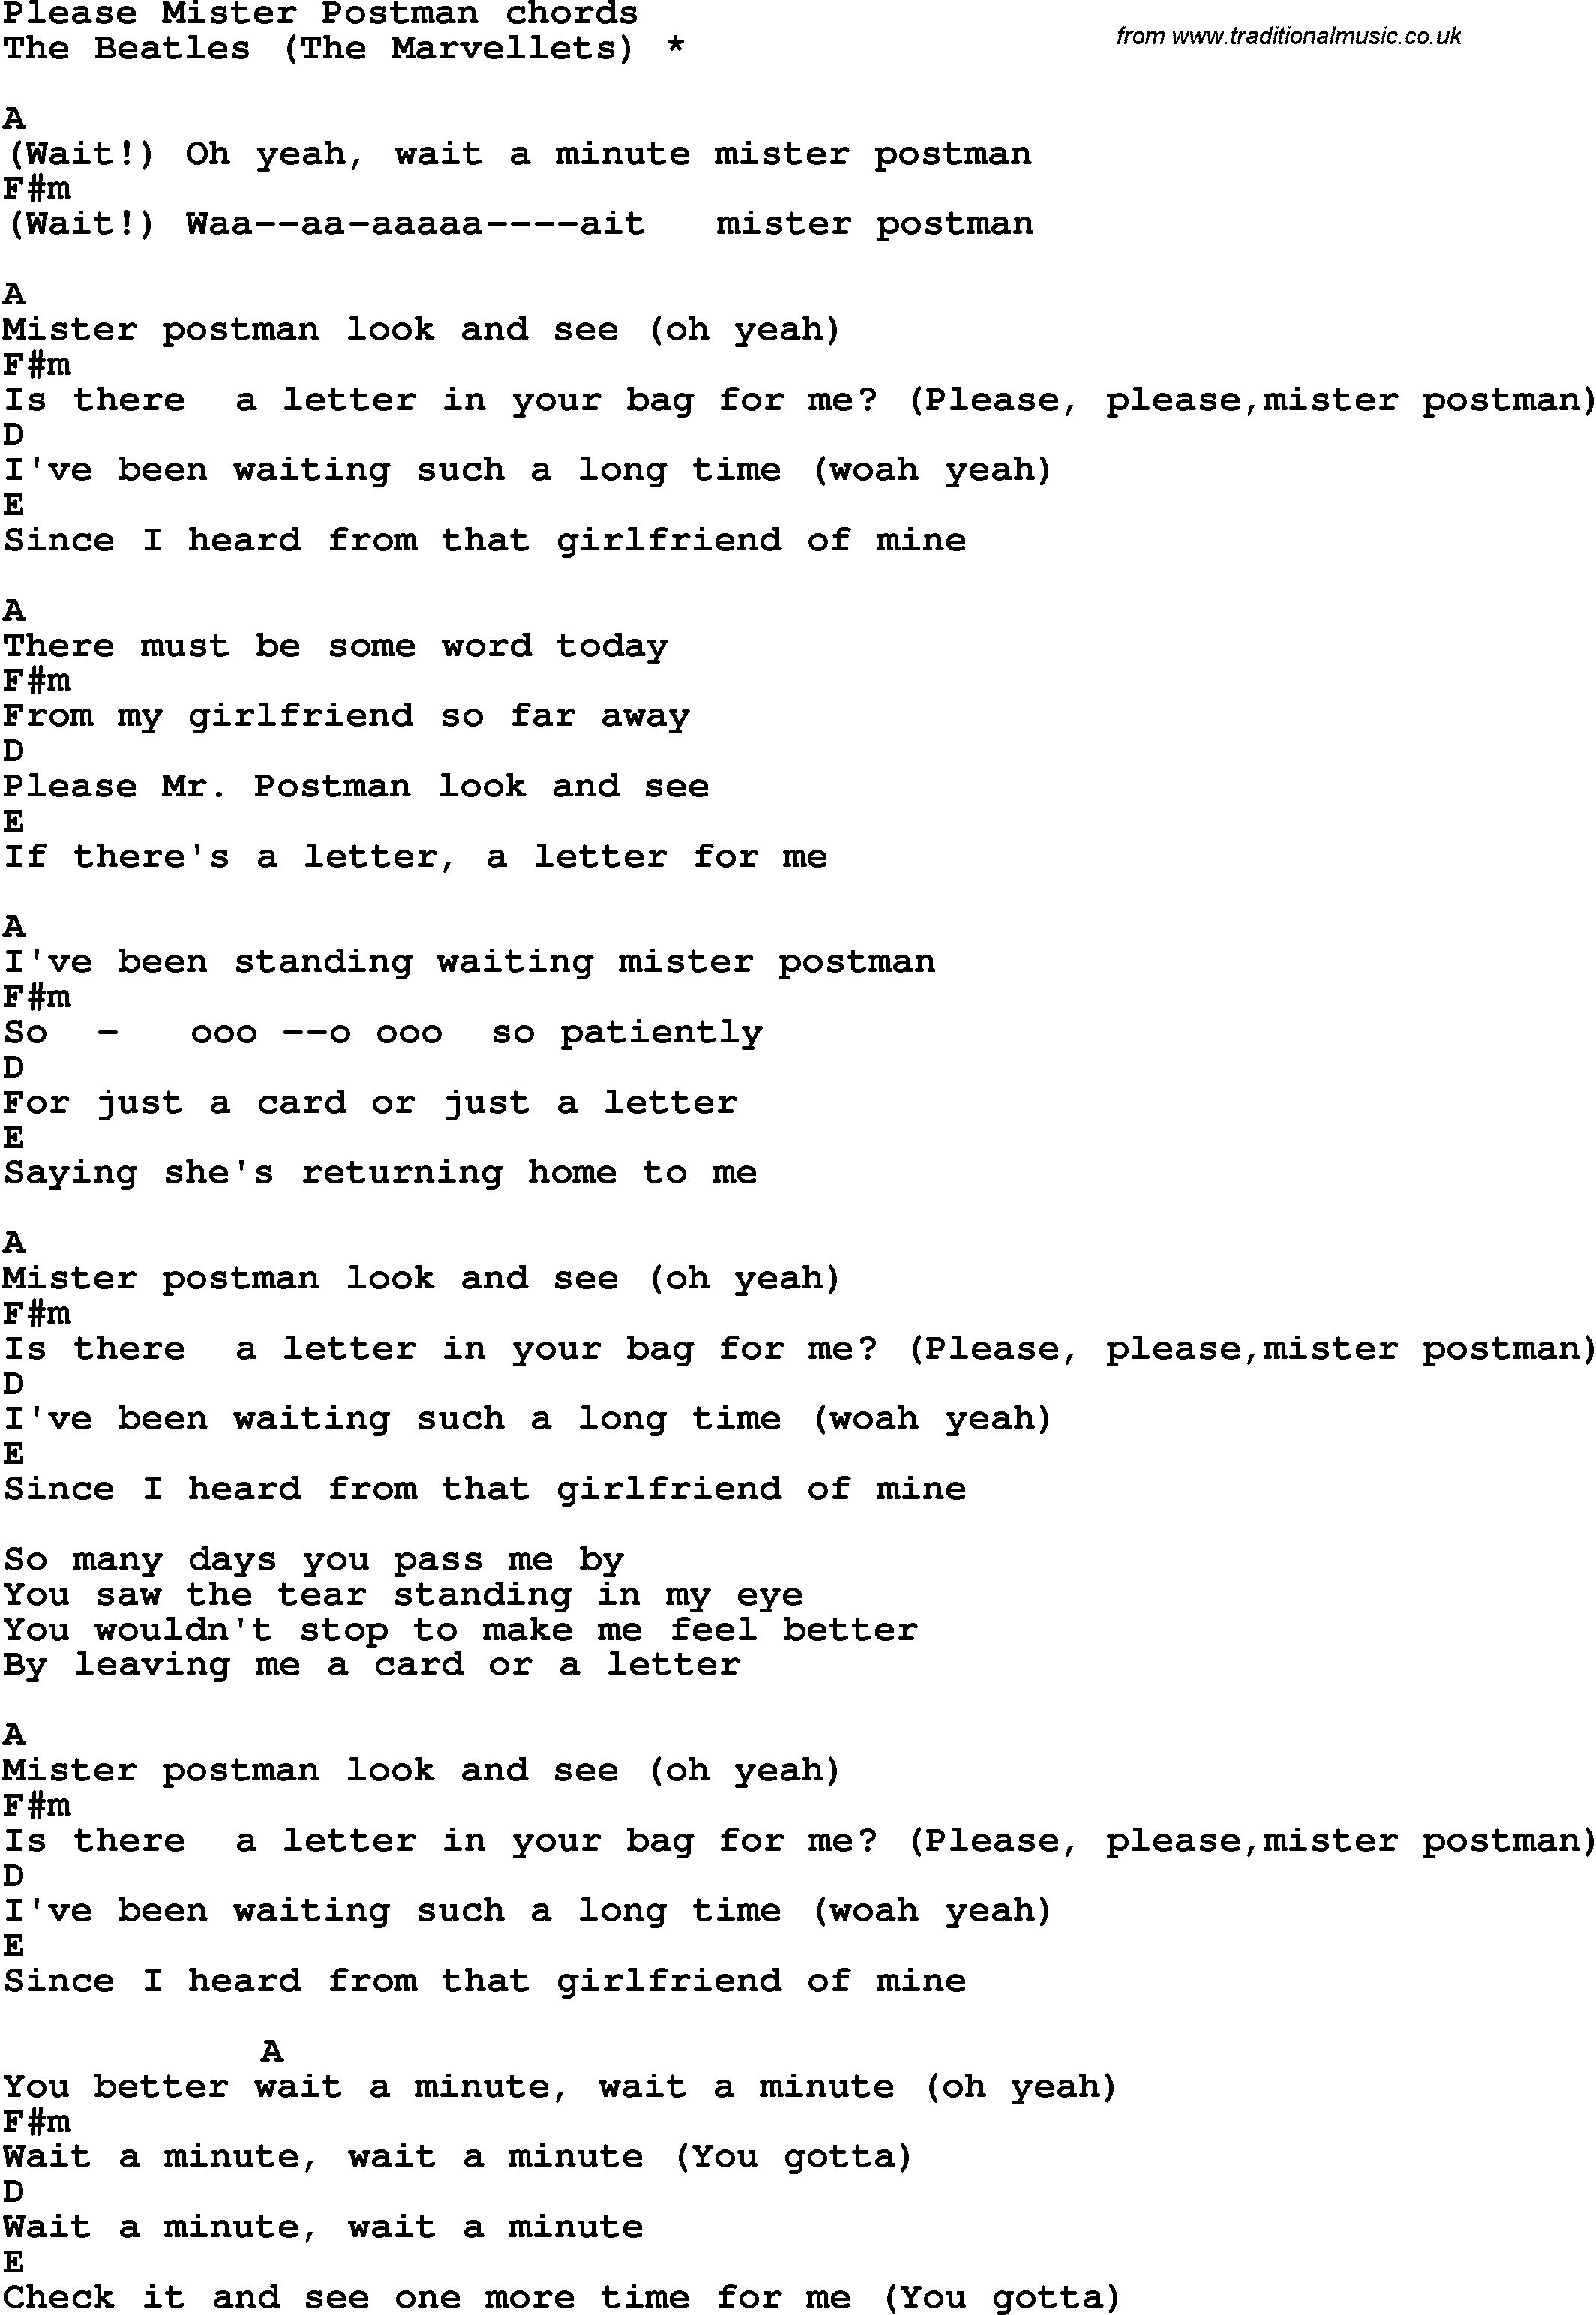 Song Lyrics with guitar chords for Please Mister Postman